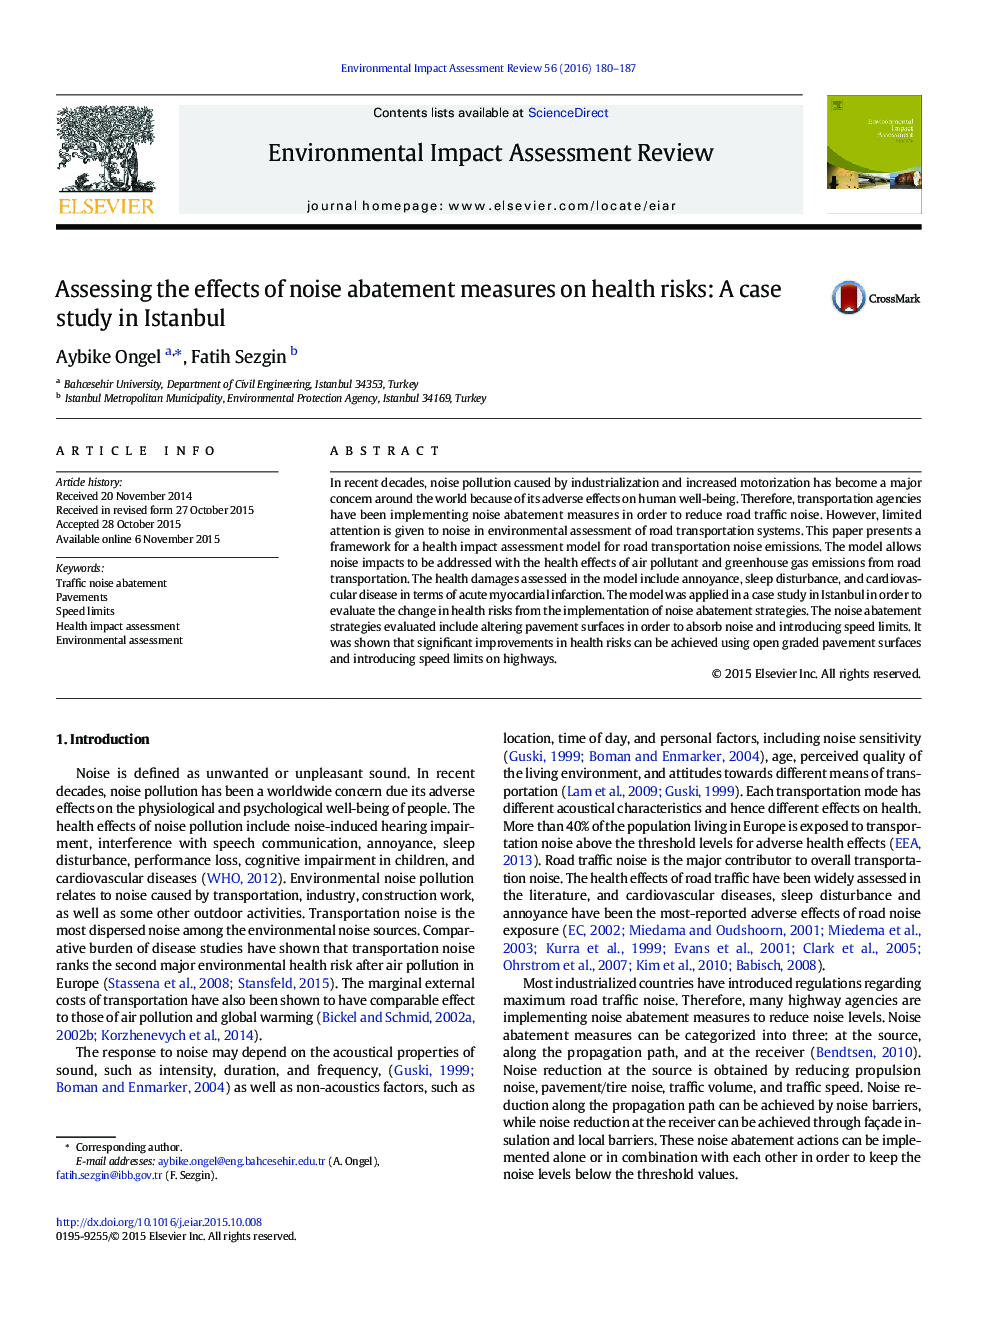 Assessing the effects of noise abatement measures on health risks: A case study in Istanbul